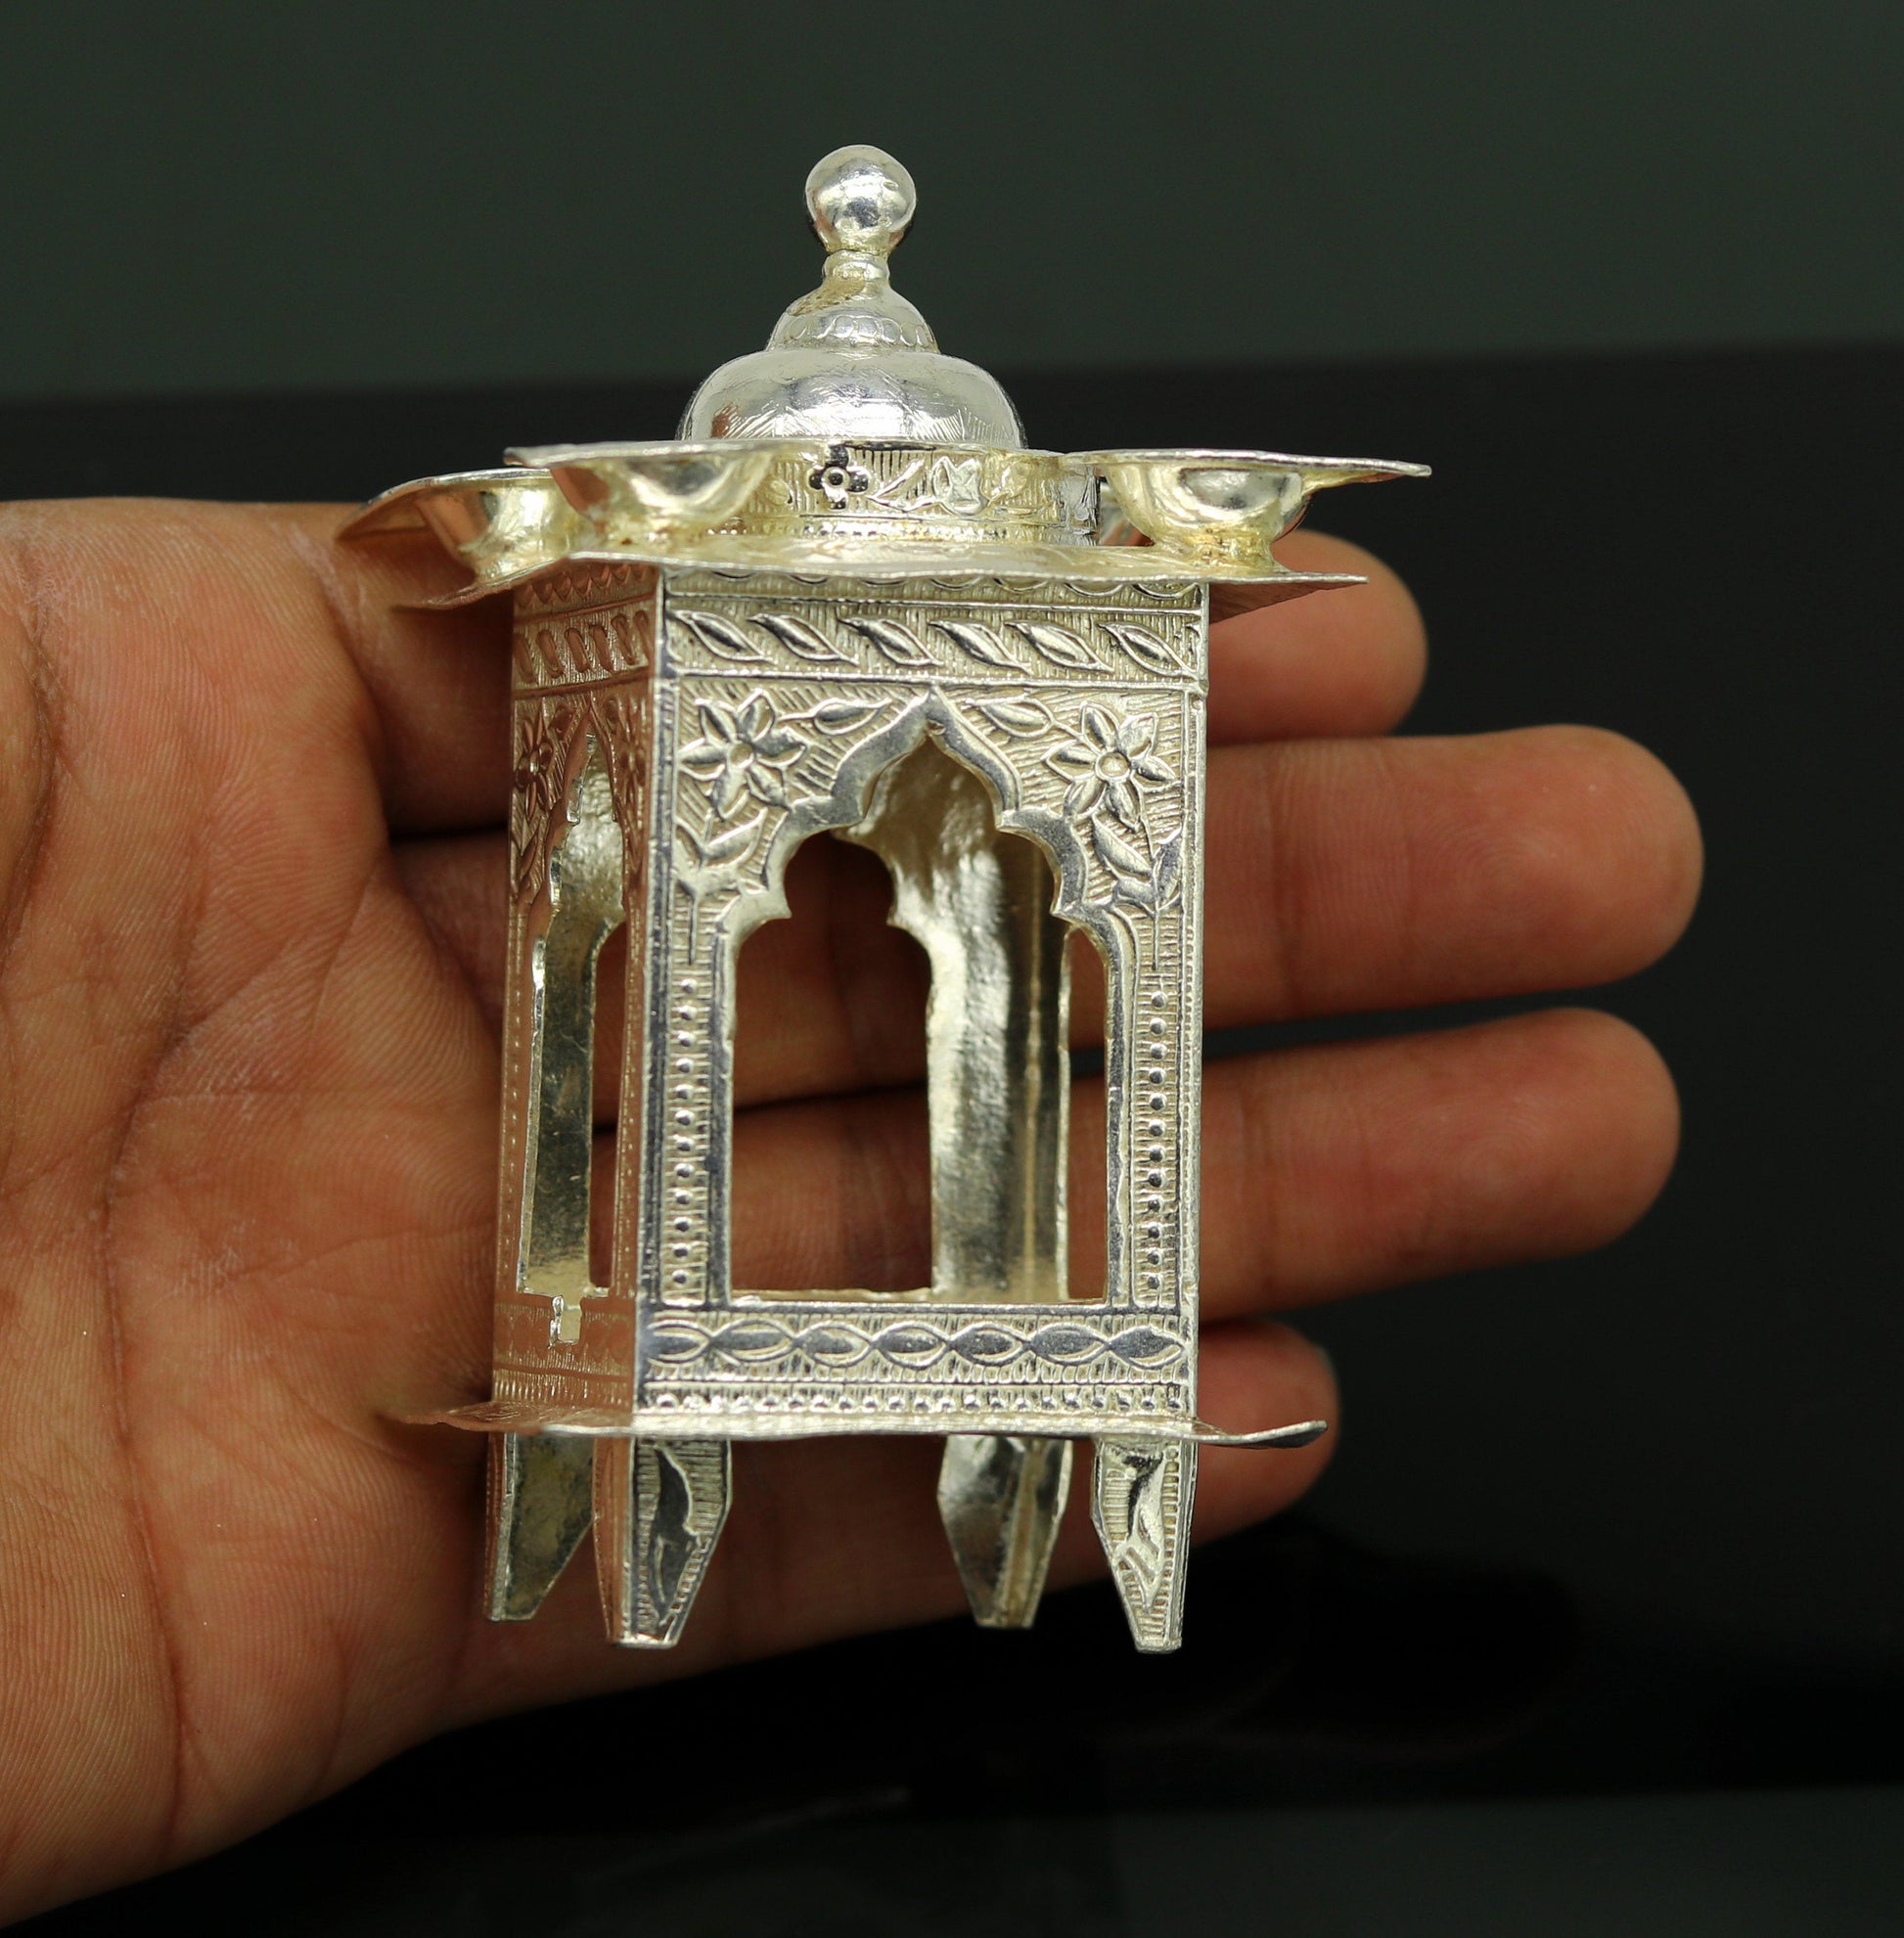 Sterling silver handmade amazing design home mini temple with oil lamp, amazing handcrafting work home decor temple art figurine  sst12 - TRIBAL ORNAMENTS